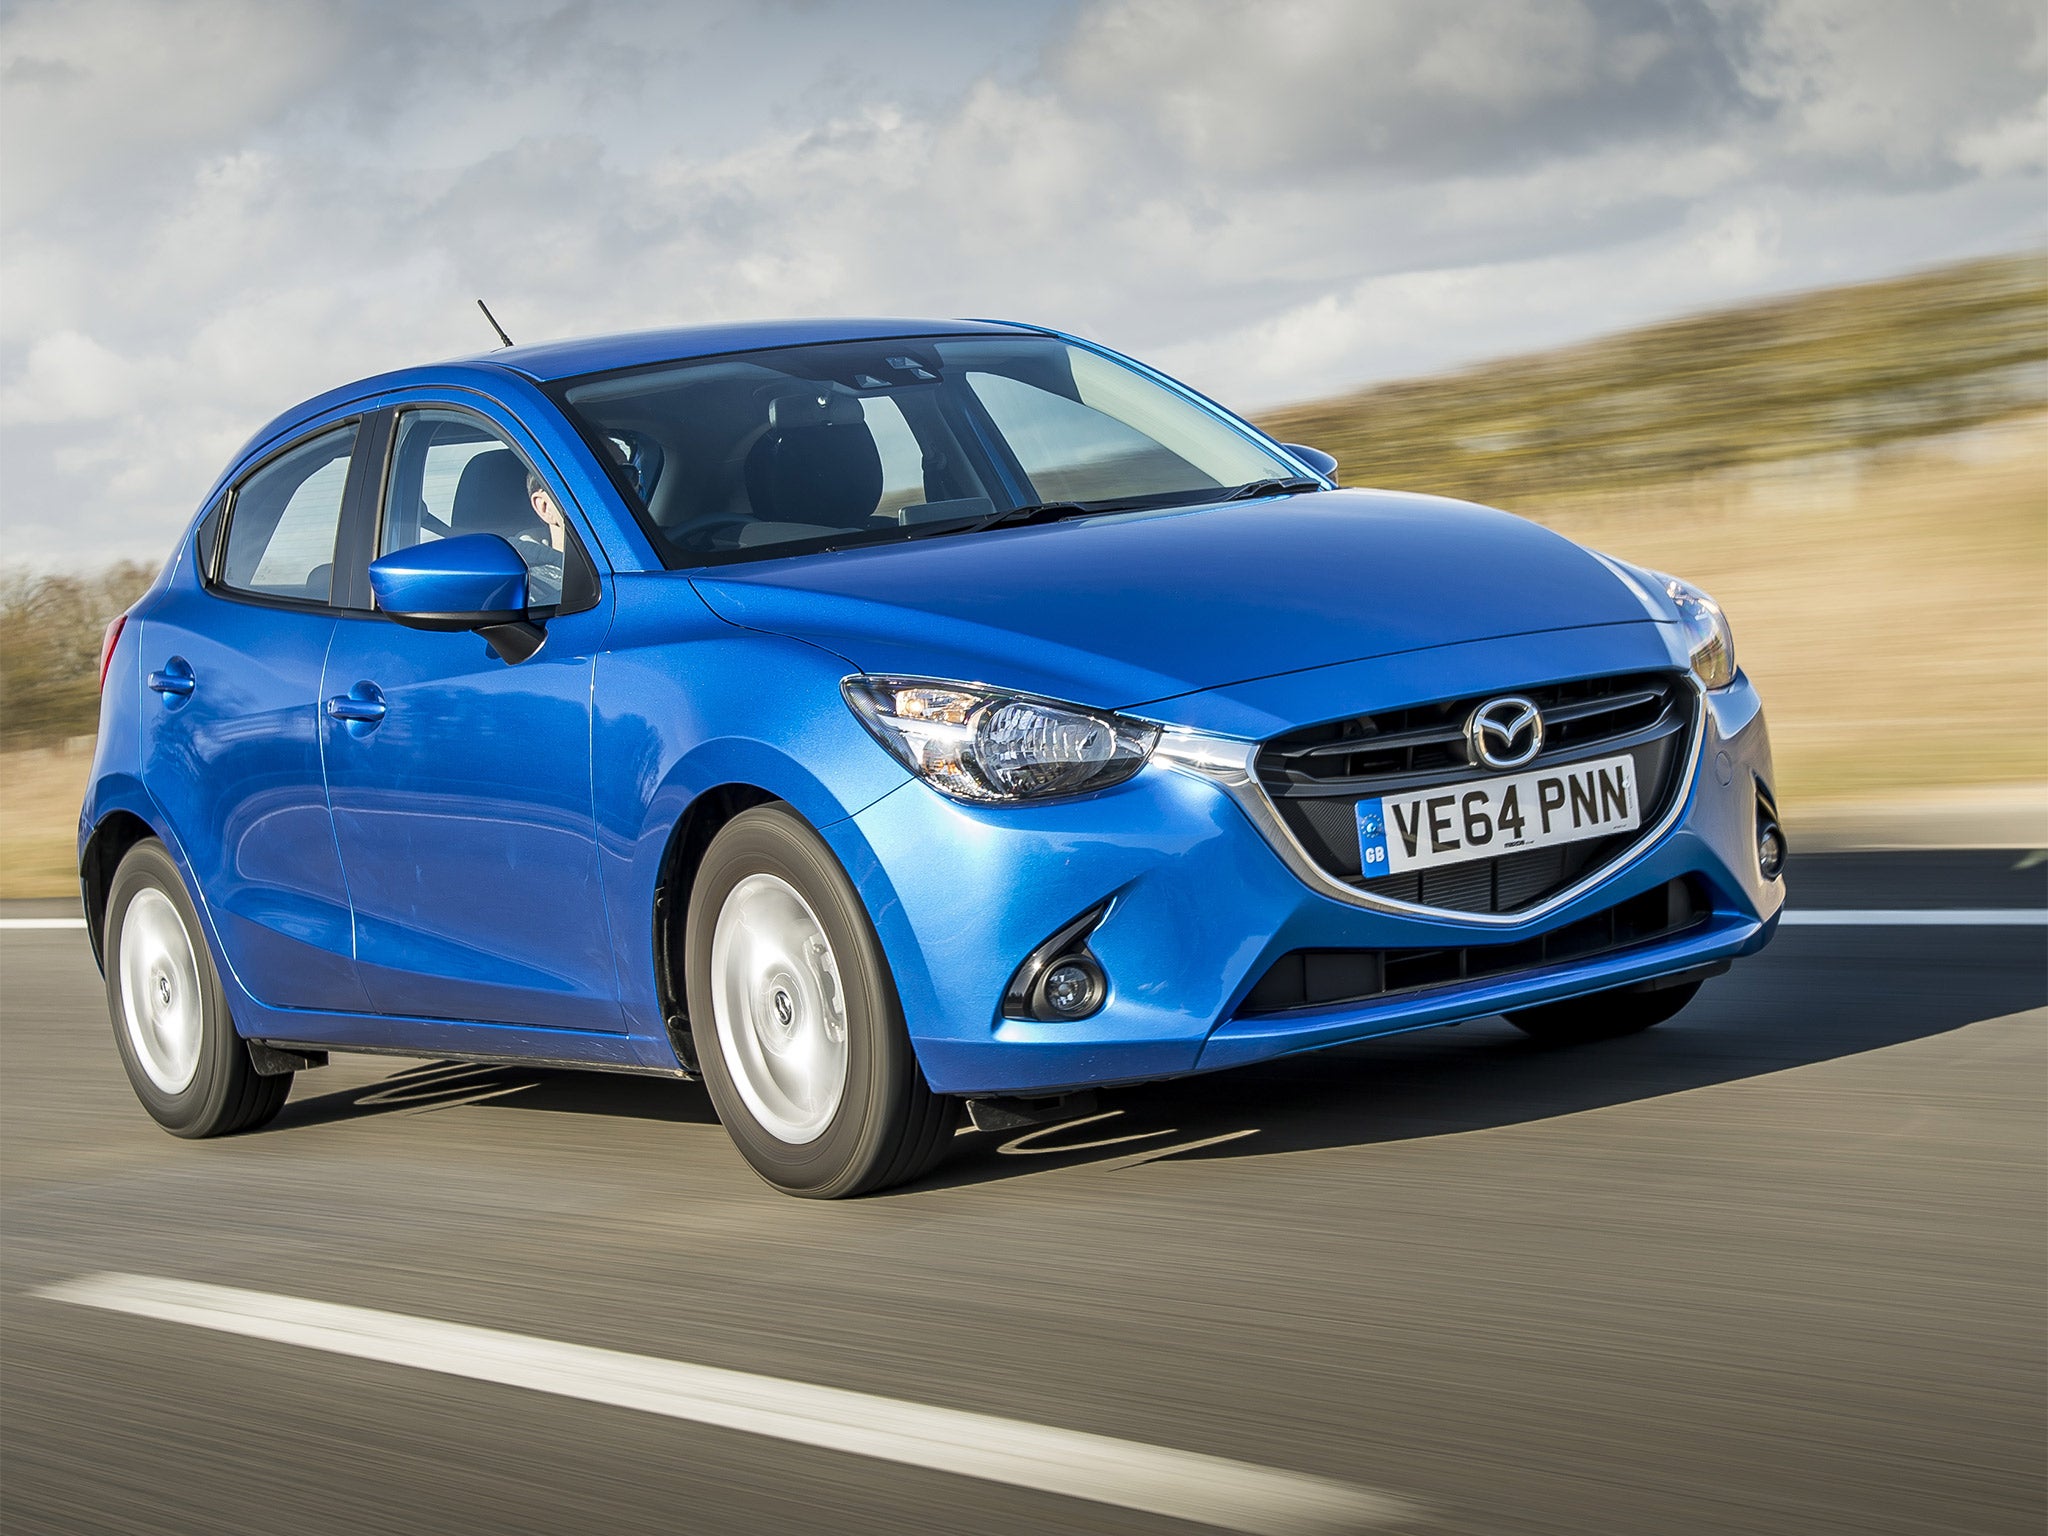 Mazda 2, motoring review: Could do better on bends but perfect on